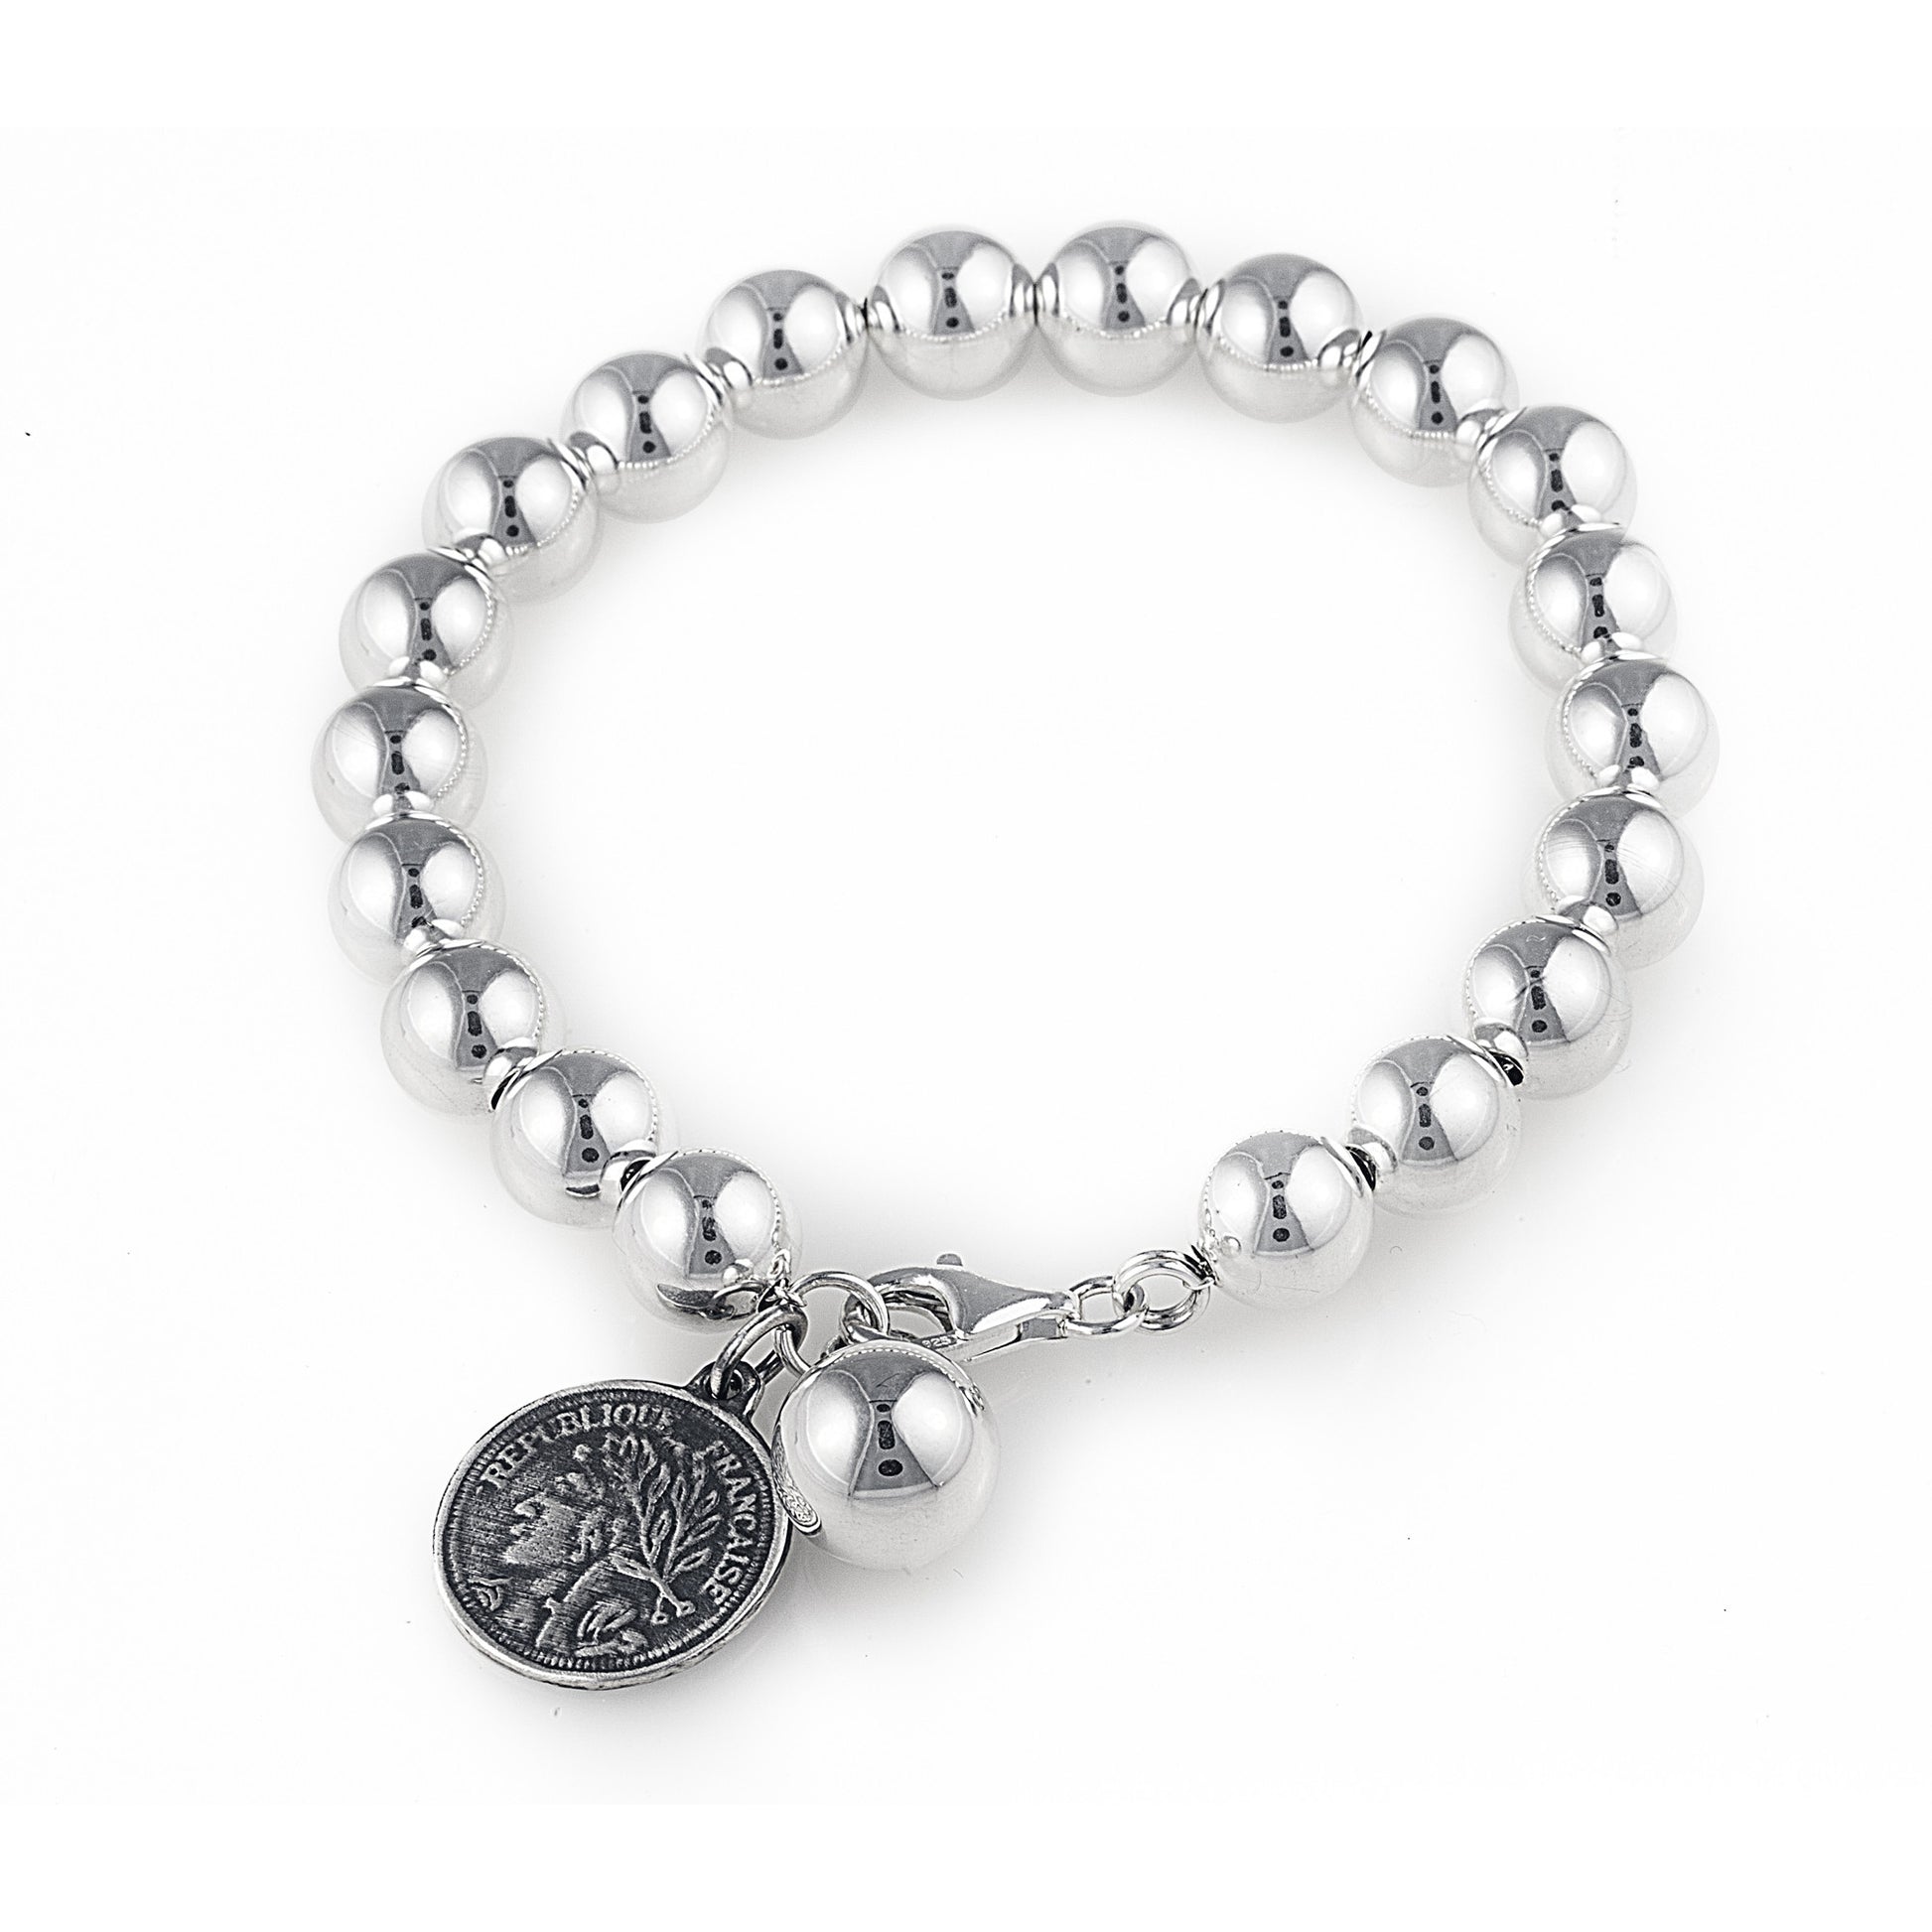 Stunning 10mm Silver beads thread onto a sturdy chain for ladies who want a modern take on the classic pearl bracelet. The bracelet features a silver ball our coin charm. The length of the bracelet is approximately 21.5cm in length. Suitable for large size wrists.